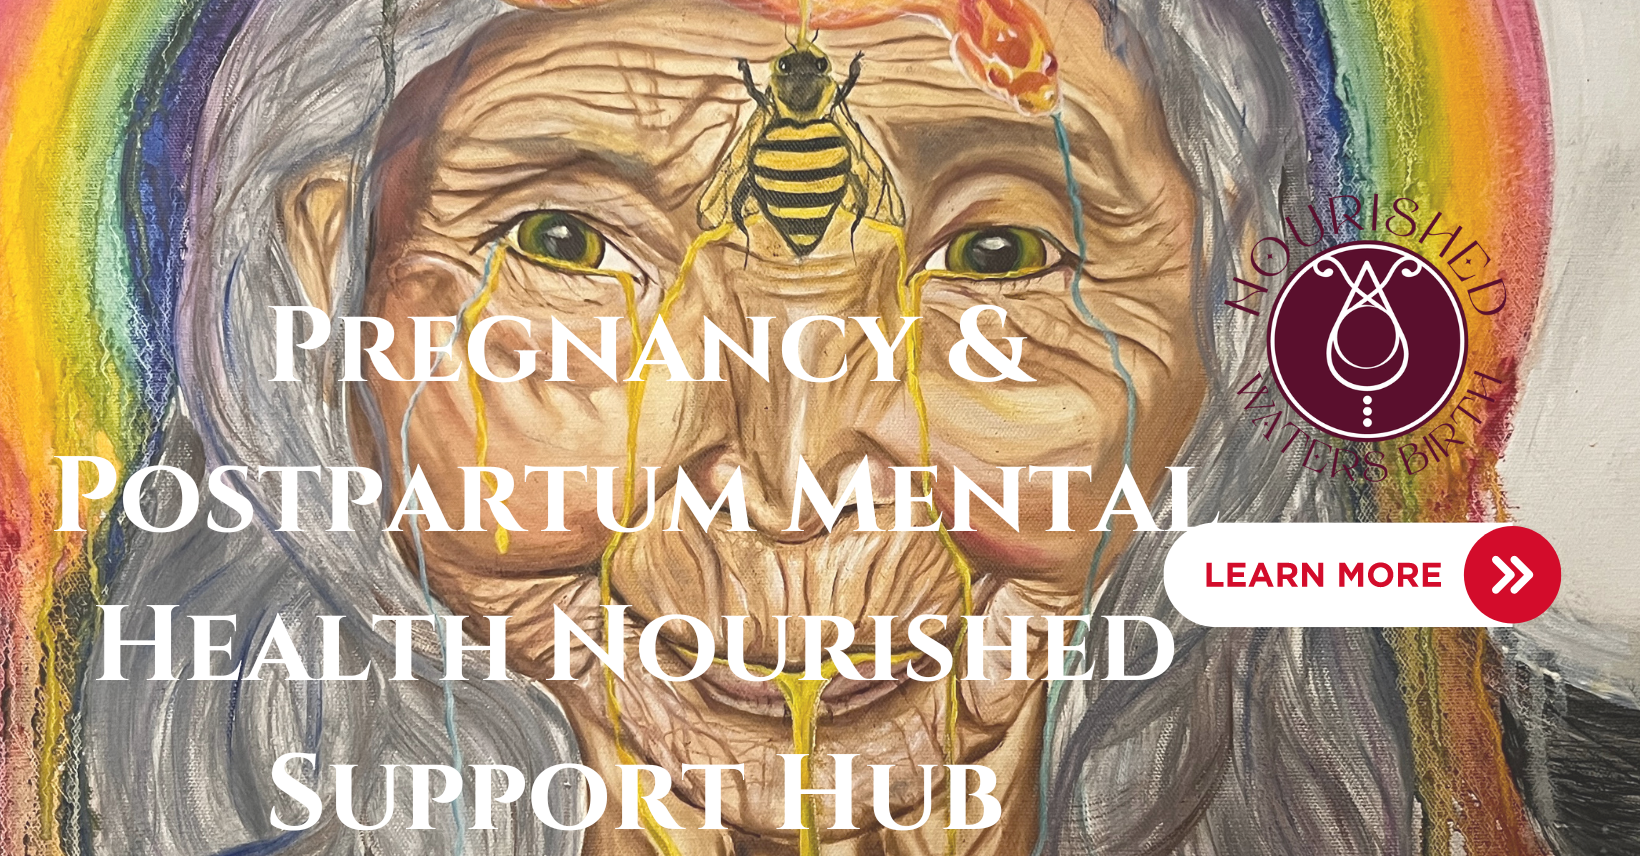 Facebook Page: Pregnancy & Postpartum Mental Health Nourished Support Hub  thumbnail